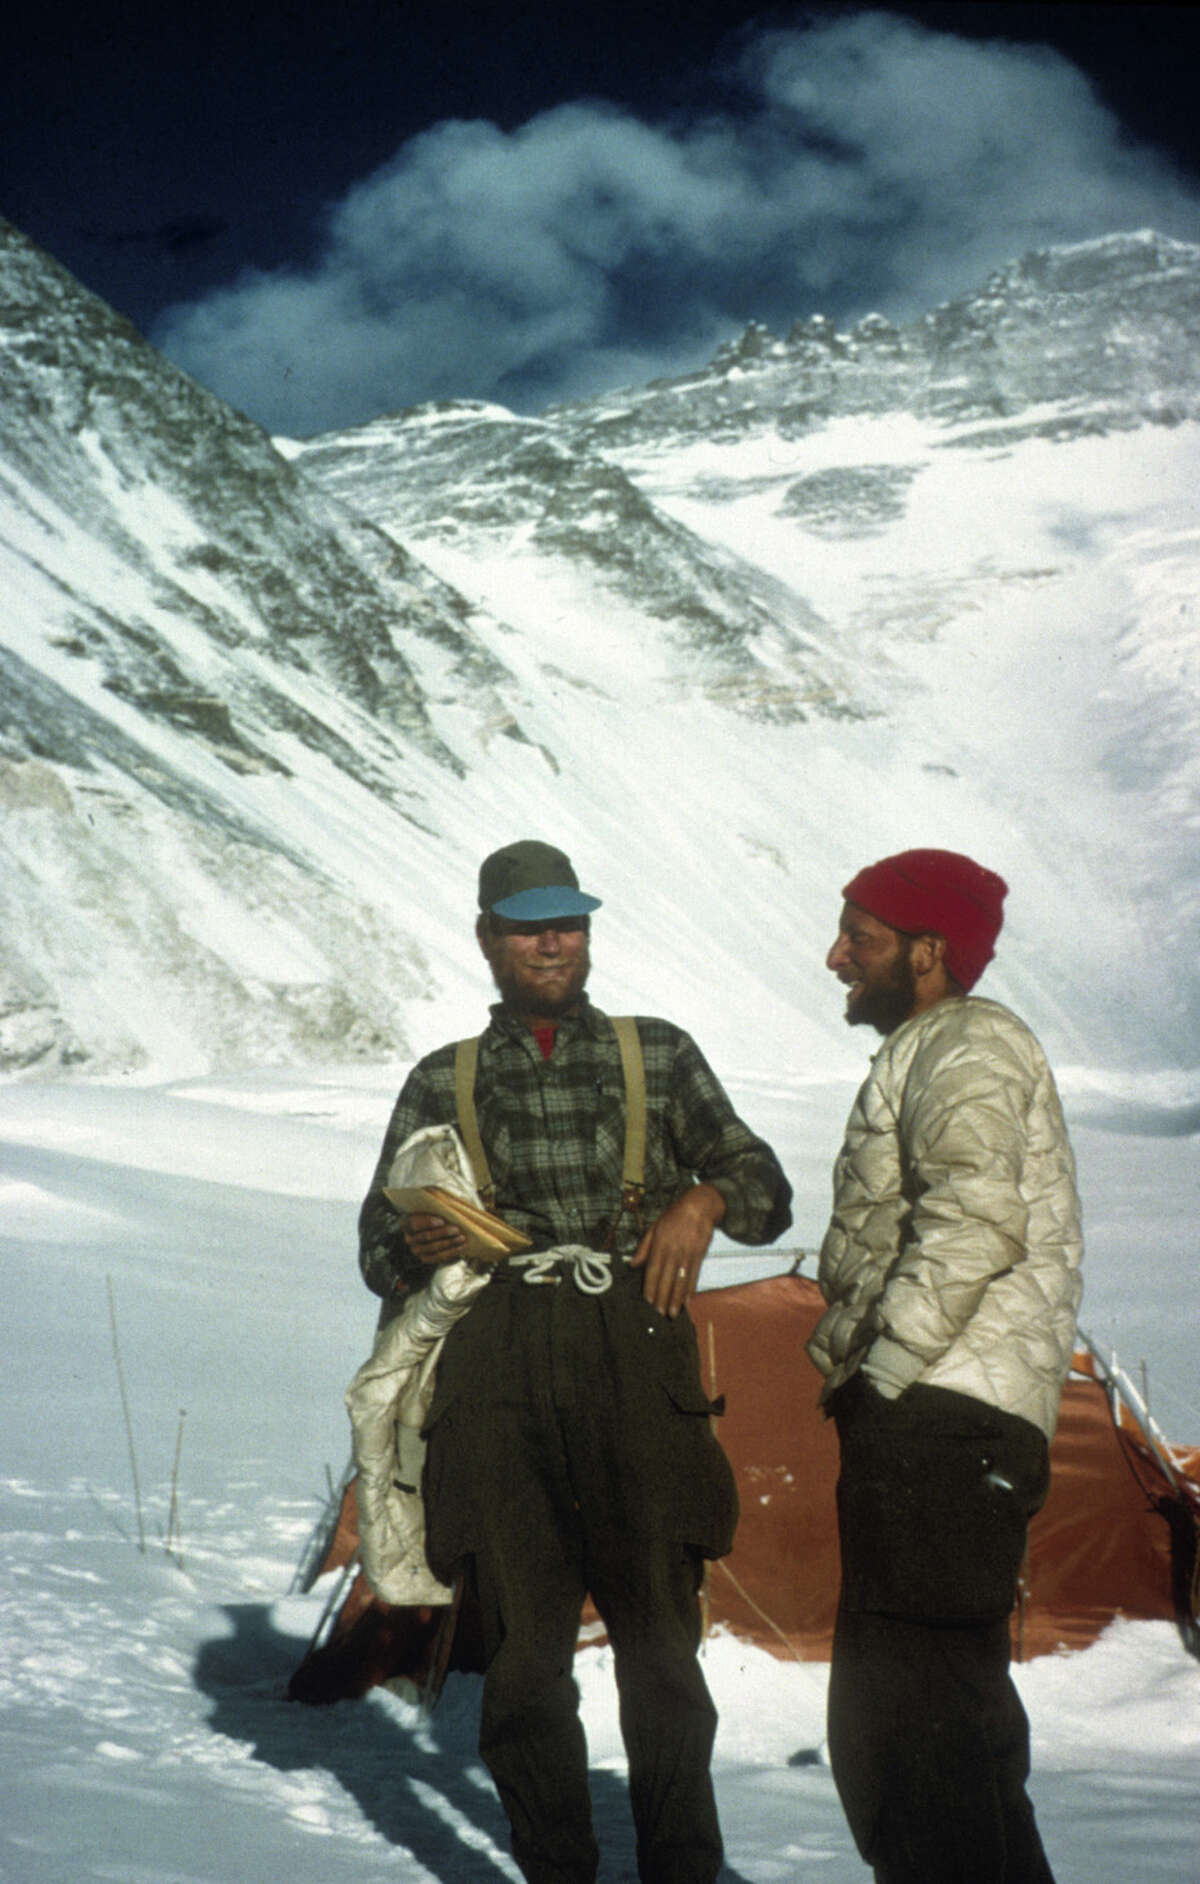 Willi Unsoeld and Tom Hornbein at Camp 2 on their climb of the west ridge of Everest, and traverse of the world's highest peak.  They spent a night huddled at 27,900 feet..